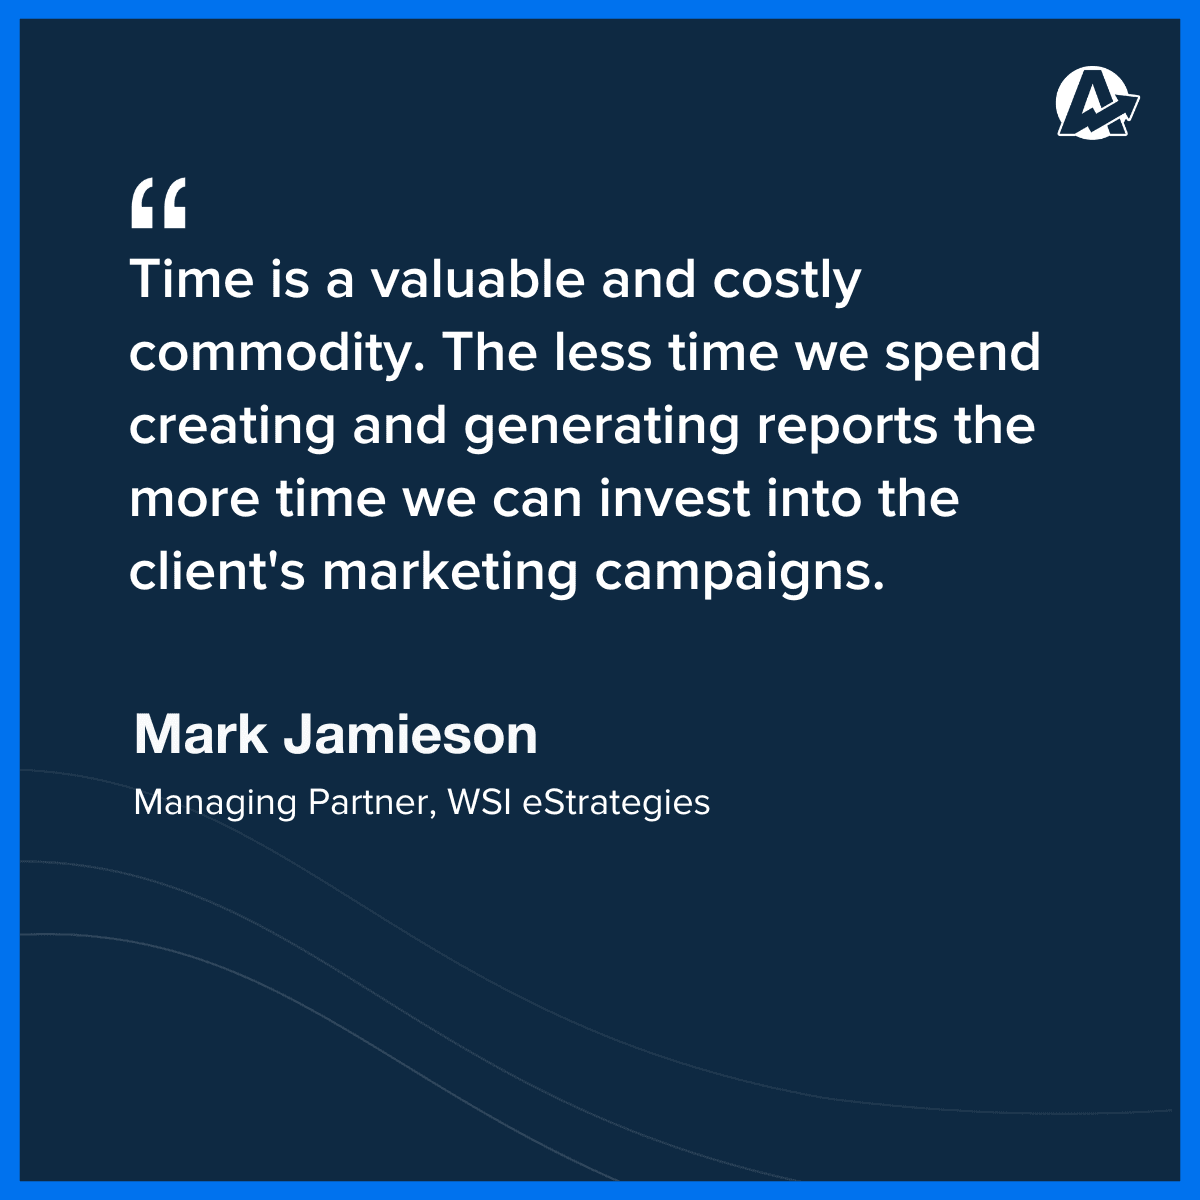 "Time is a valuable and costly commodity. The less time we spend on creating and generating reports means more time we can invest into the client's marketing campaigns." - Mark Jamieson, Managing Partner, WSI eStrategies